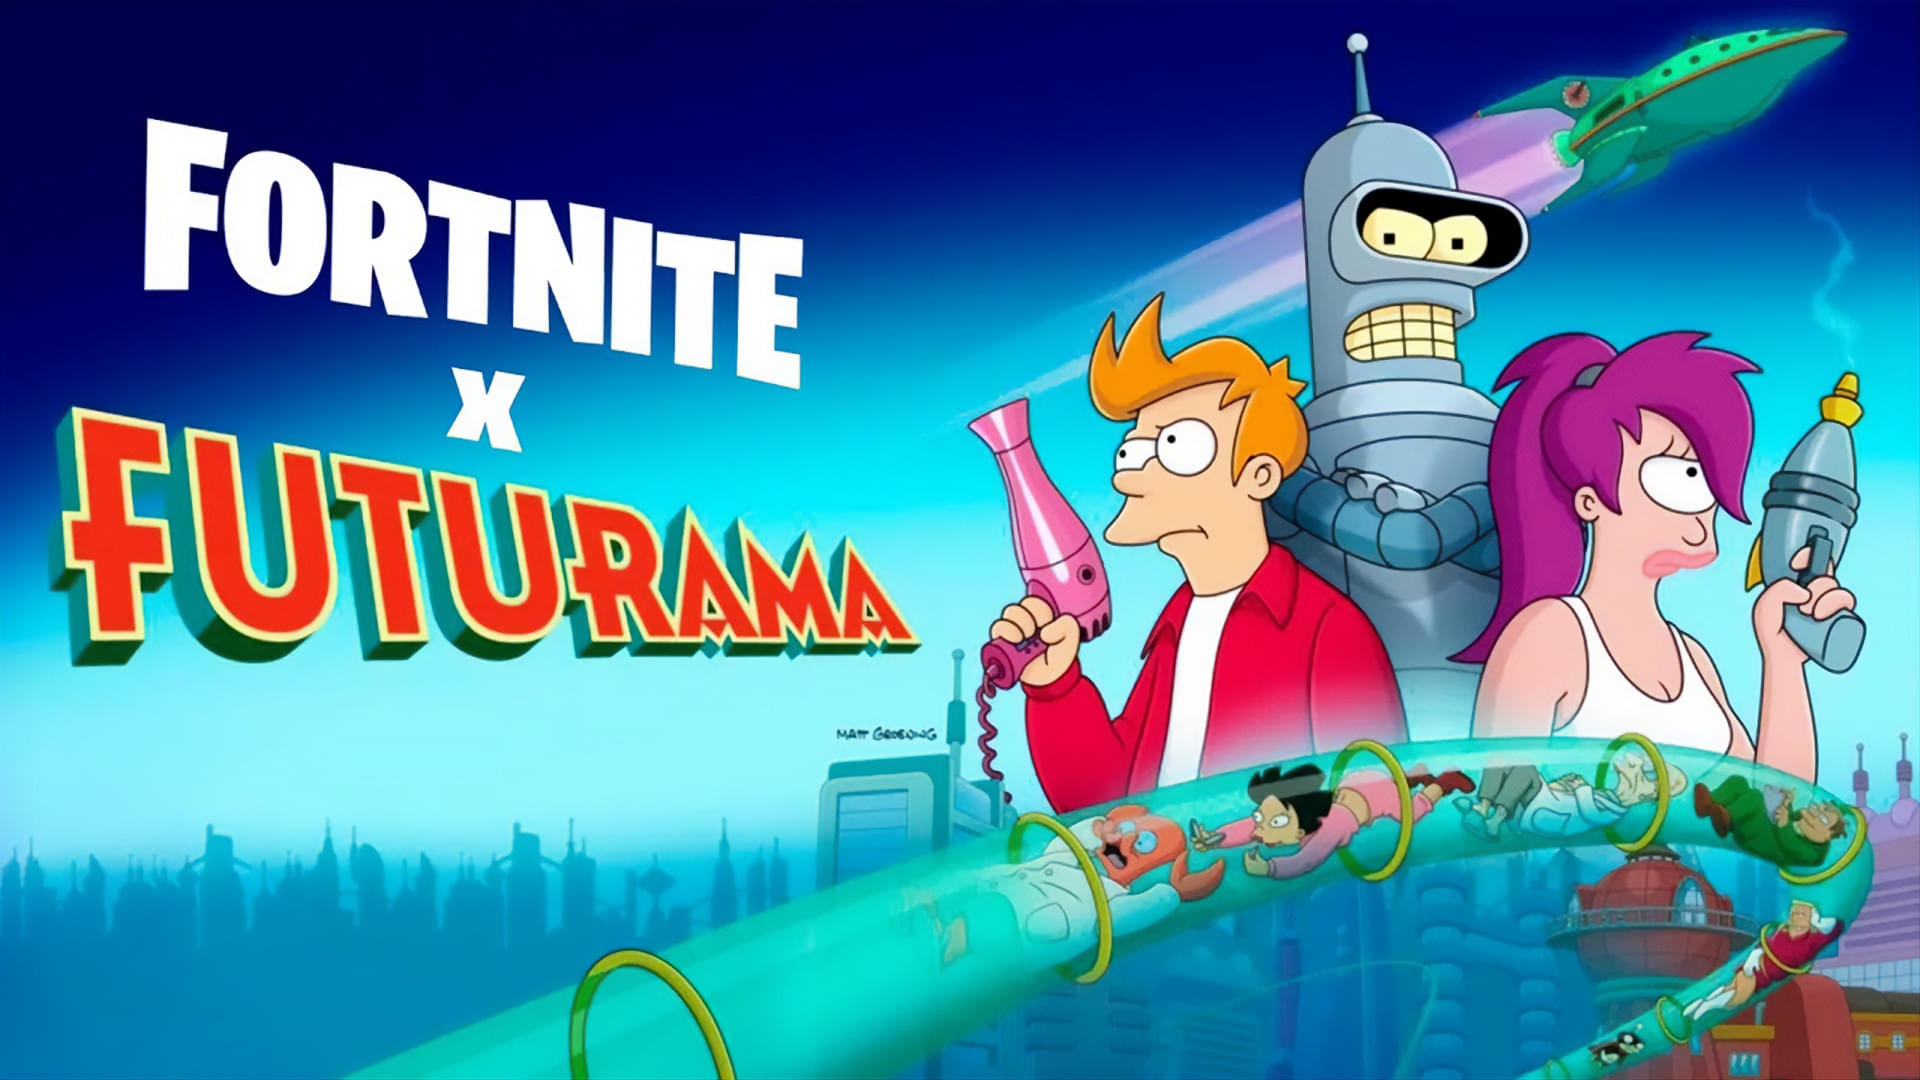 An image showing Fry, Bender and Leela from the show Futurama, which is collaborating with Fortnite update v25.30